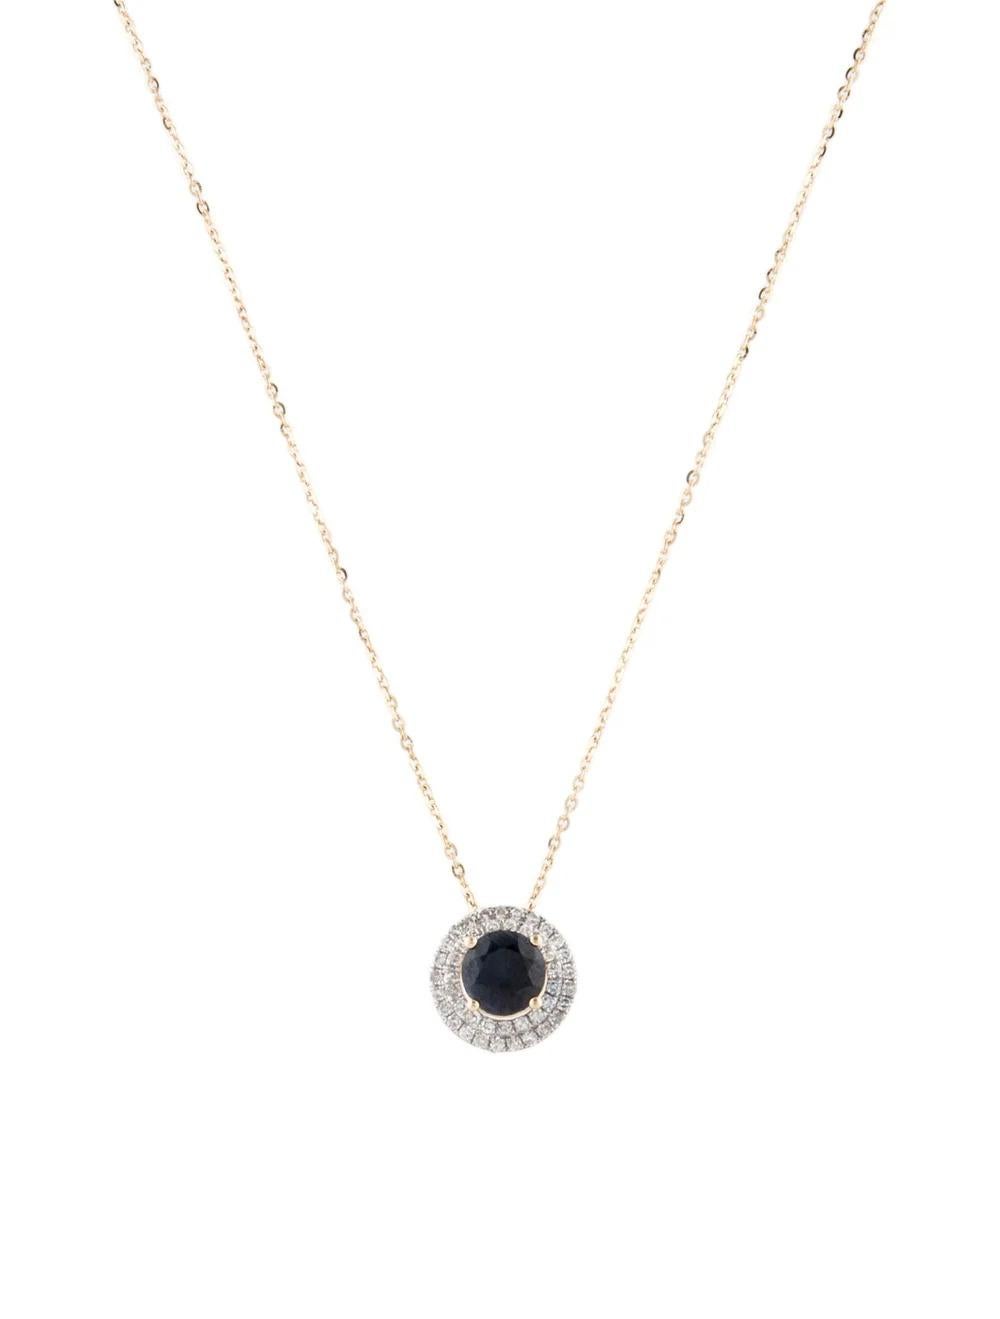 Embrace sophistication with this stunning rhodium-plated and 14K yellow gold pendant necklace, featuring a captivating round modified brilliant sapphire and sparkling diamonds. Crafted to perfection, this timeless piece exudes elegance and style,